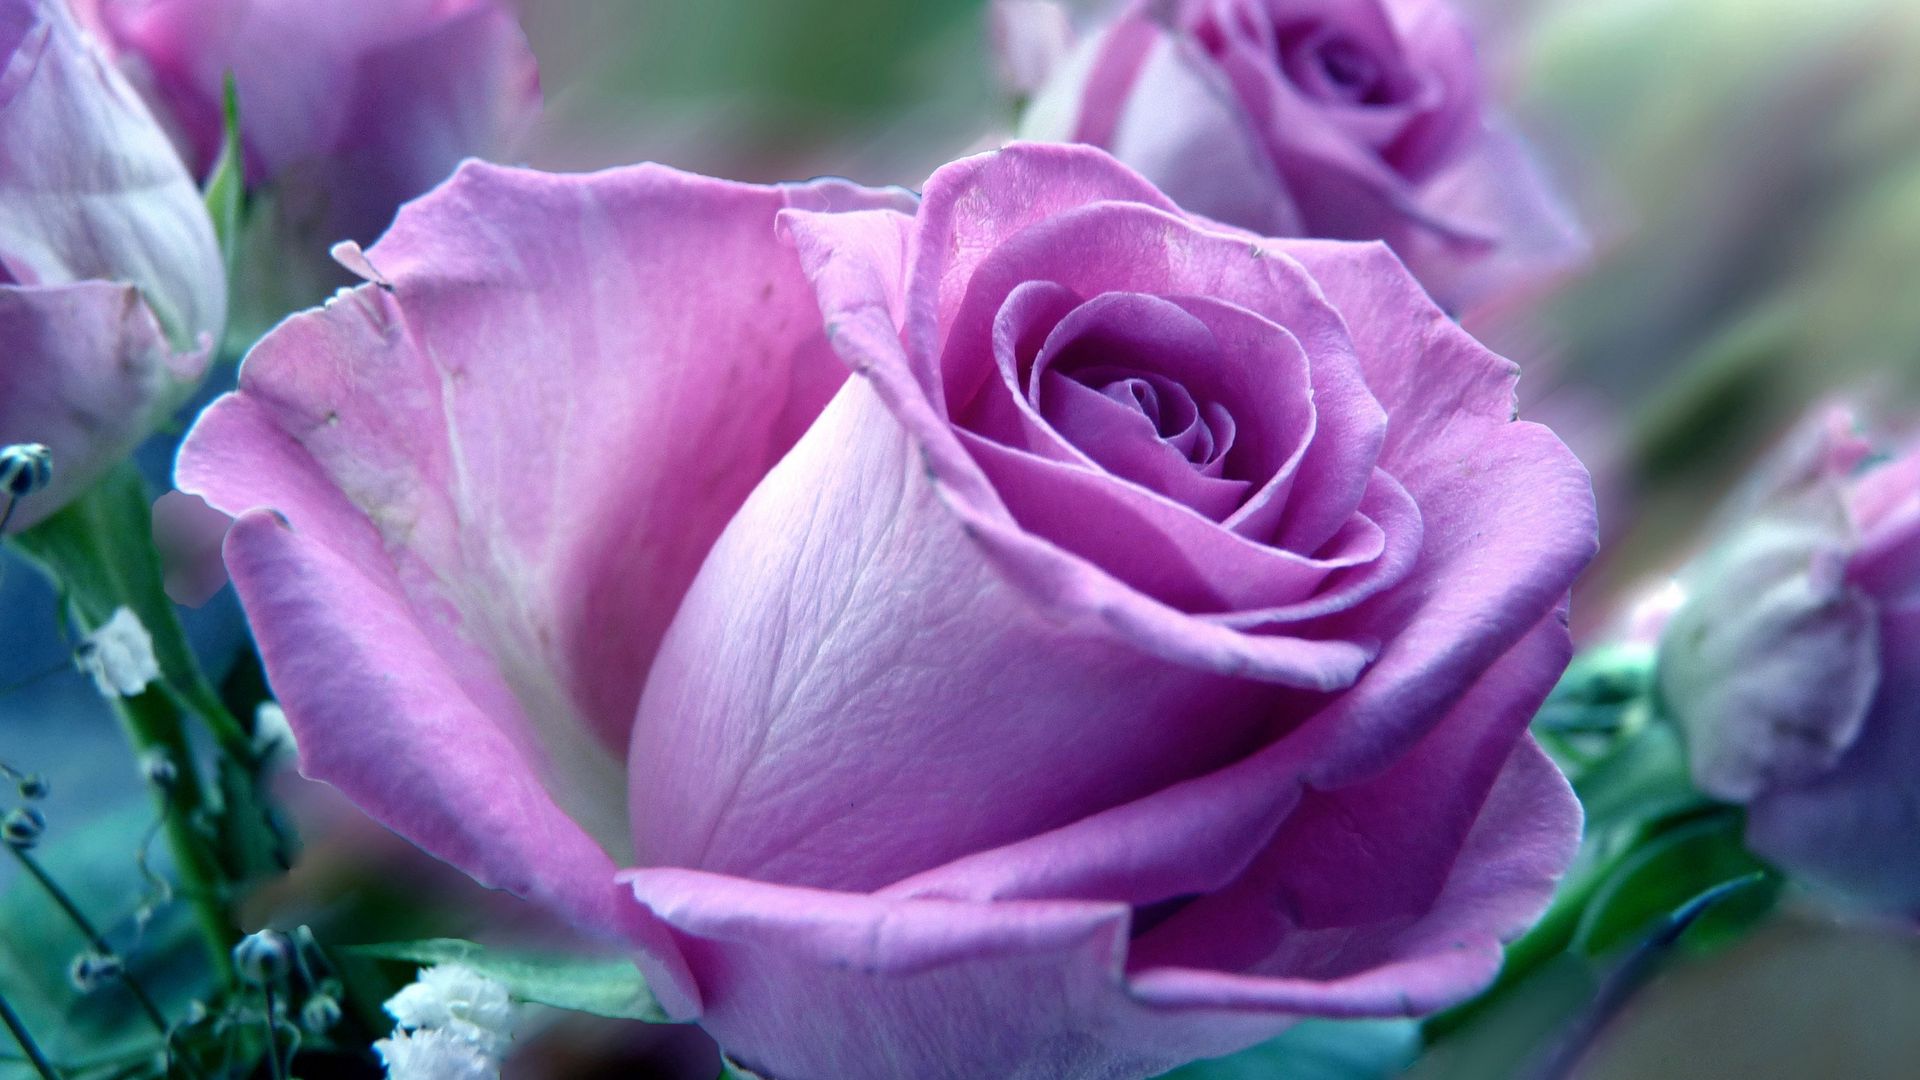 Download wallpaper 1920x1080 flower, rose, nature full hd, hdtv, fhd, 1080p  hd background